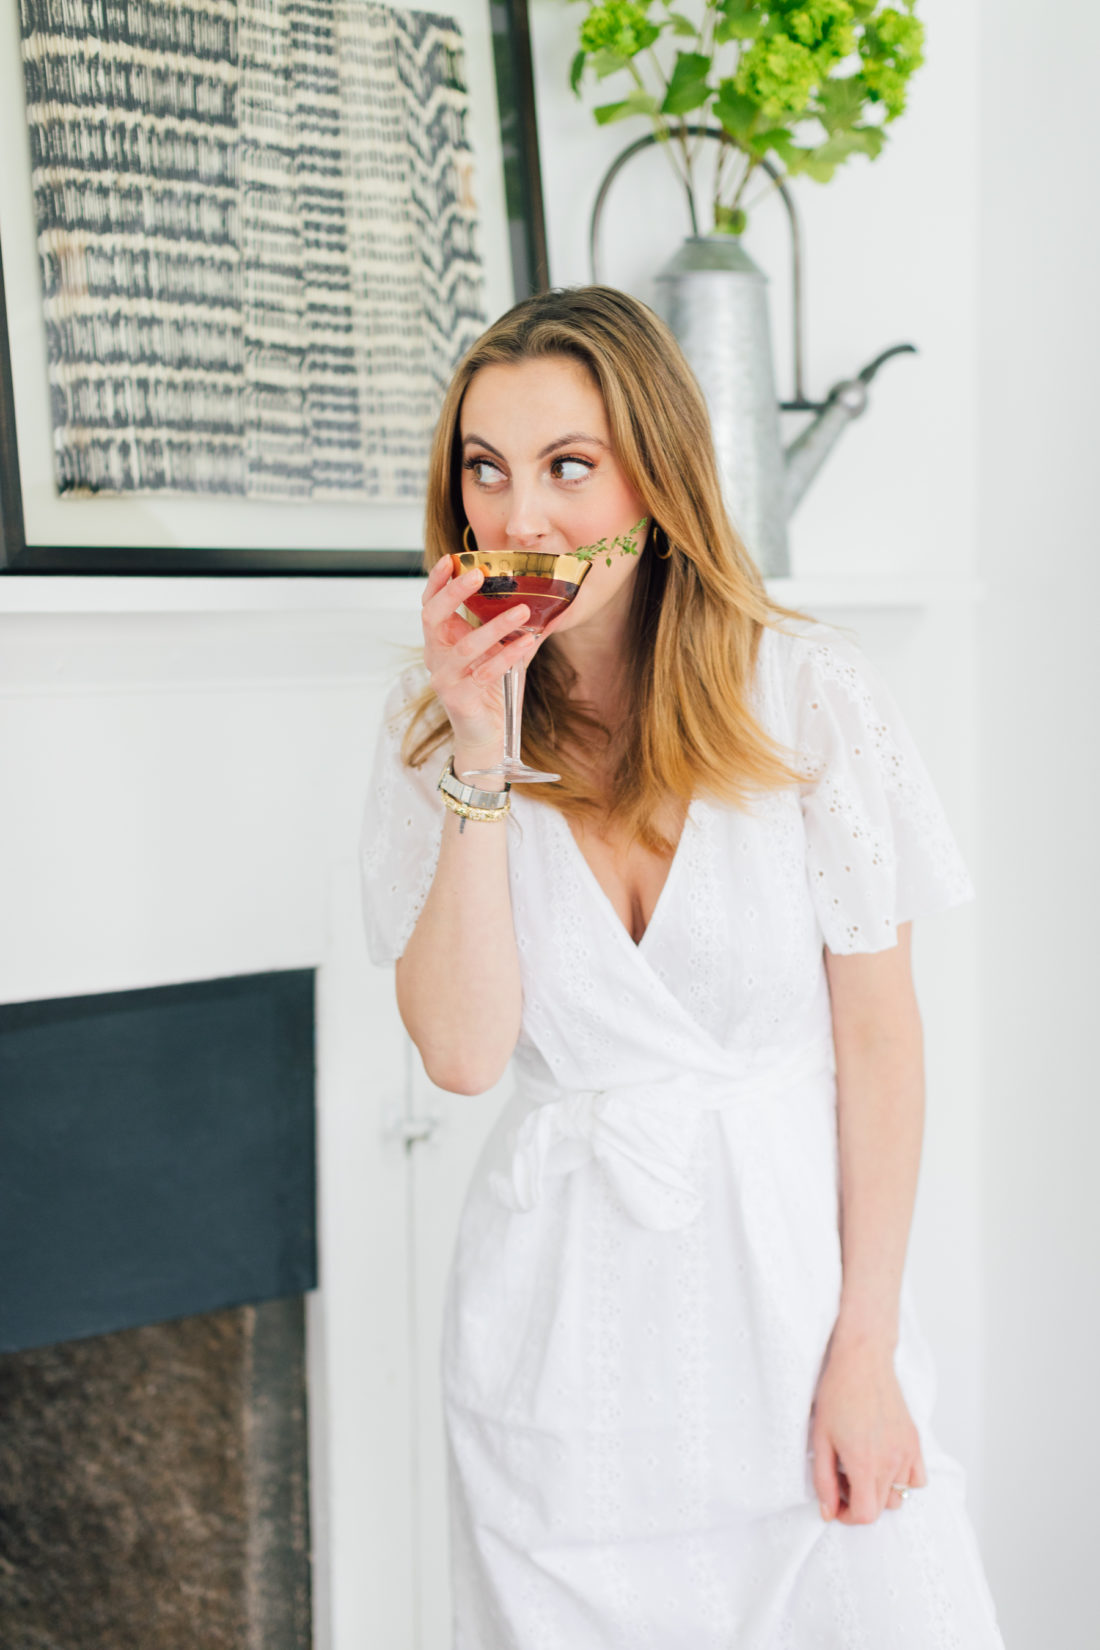 Eva Amurri Martino of Happily Eva After shares her Mommy Juice Cocktail for Mother's Day